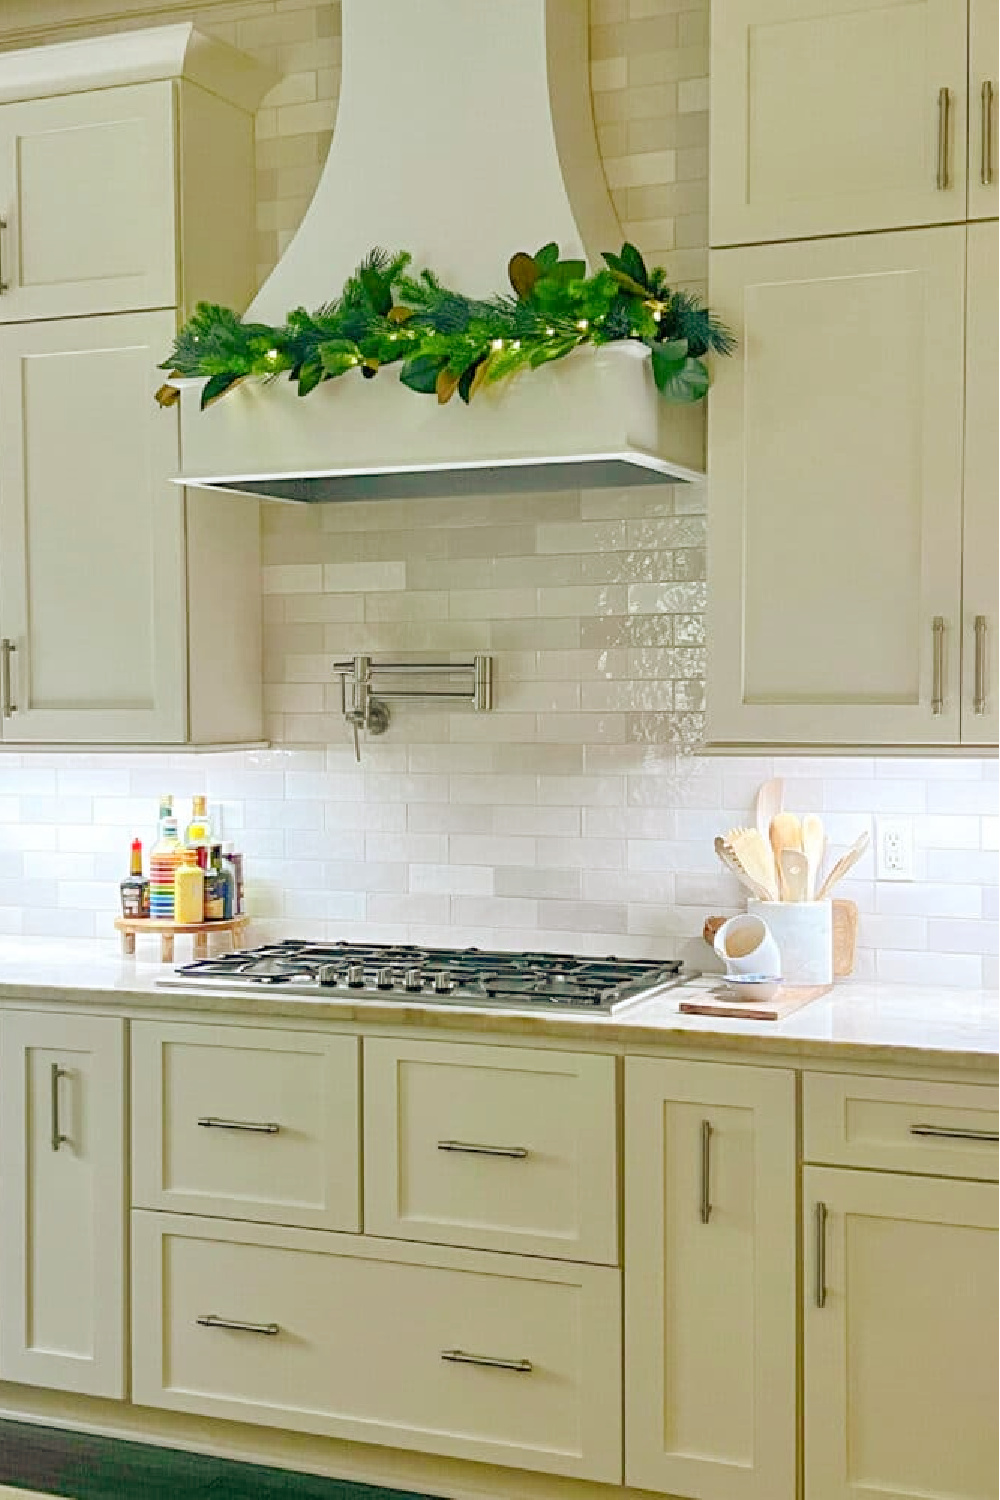 Holiday kitchen with garland on range hood - Classic Casual Home (Mary Ann Pickett). #holidaykitchen #classicwhitekitchens